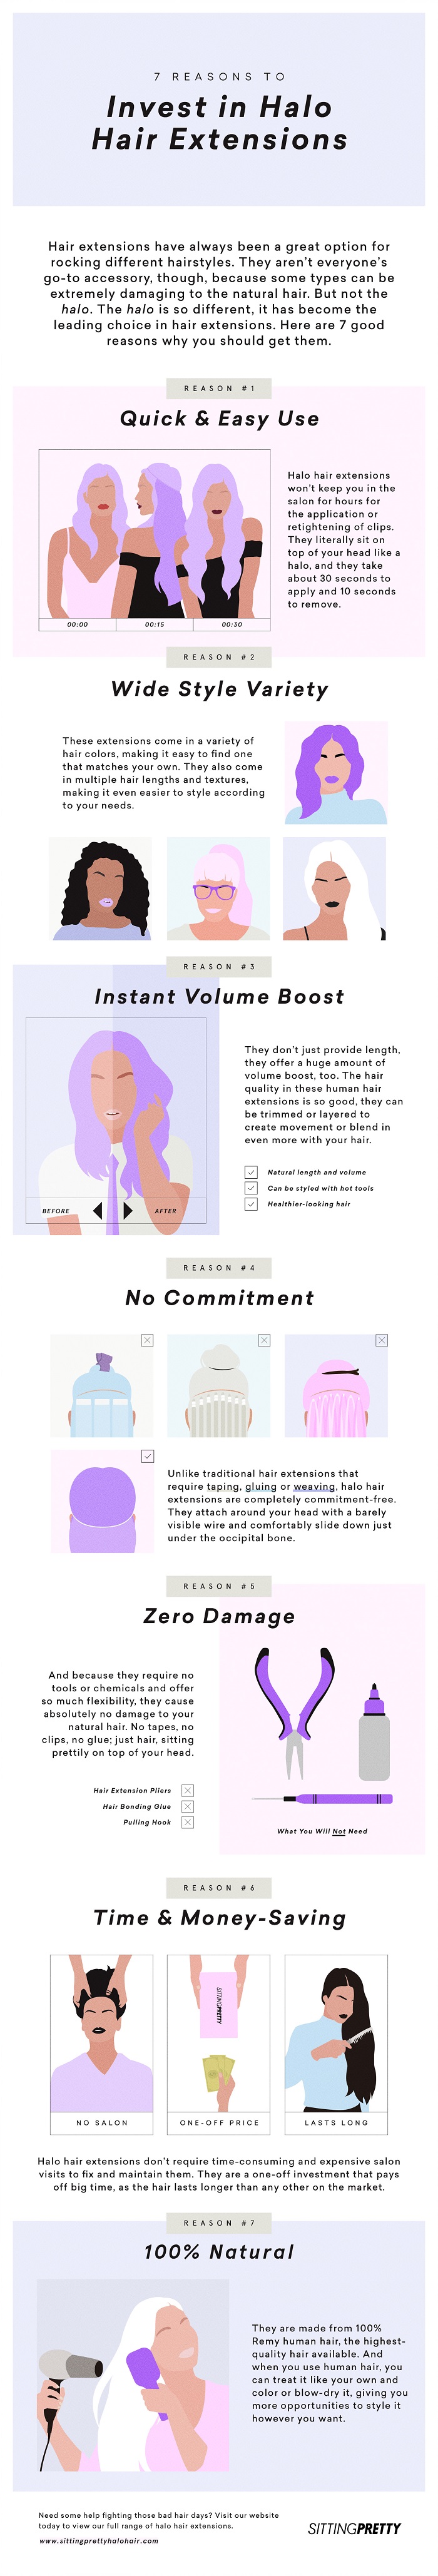 reasons to get halo hair extensions 